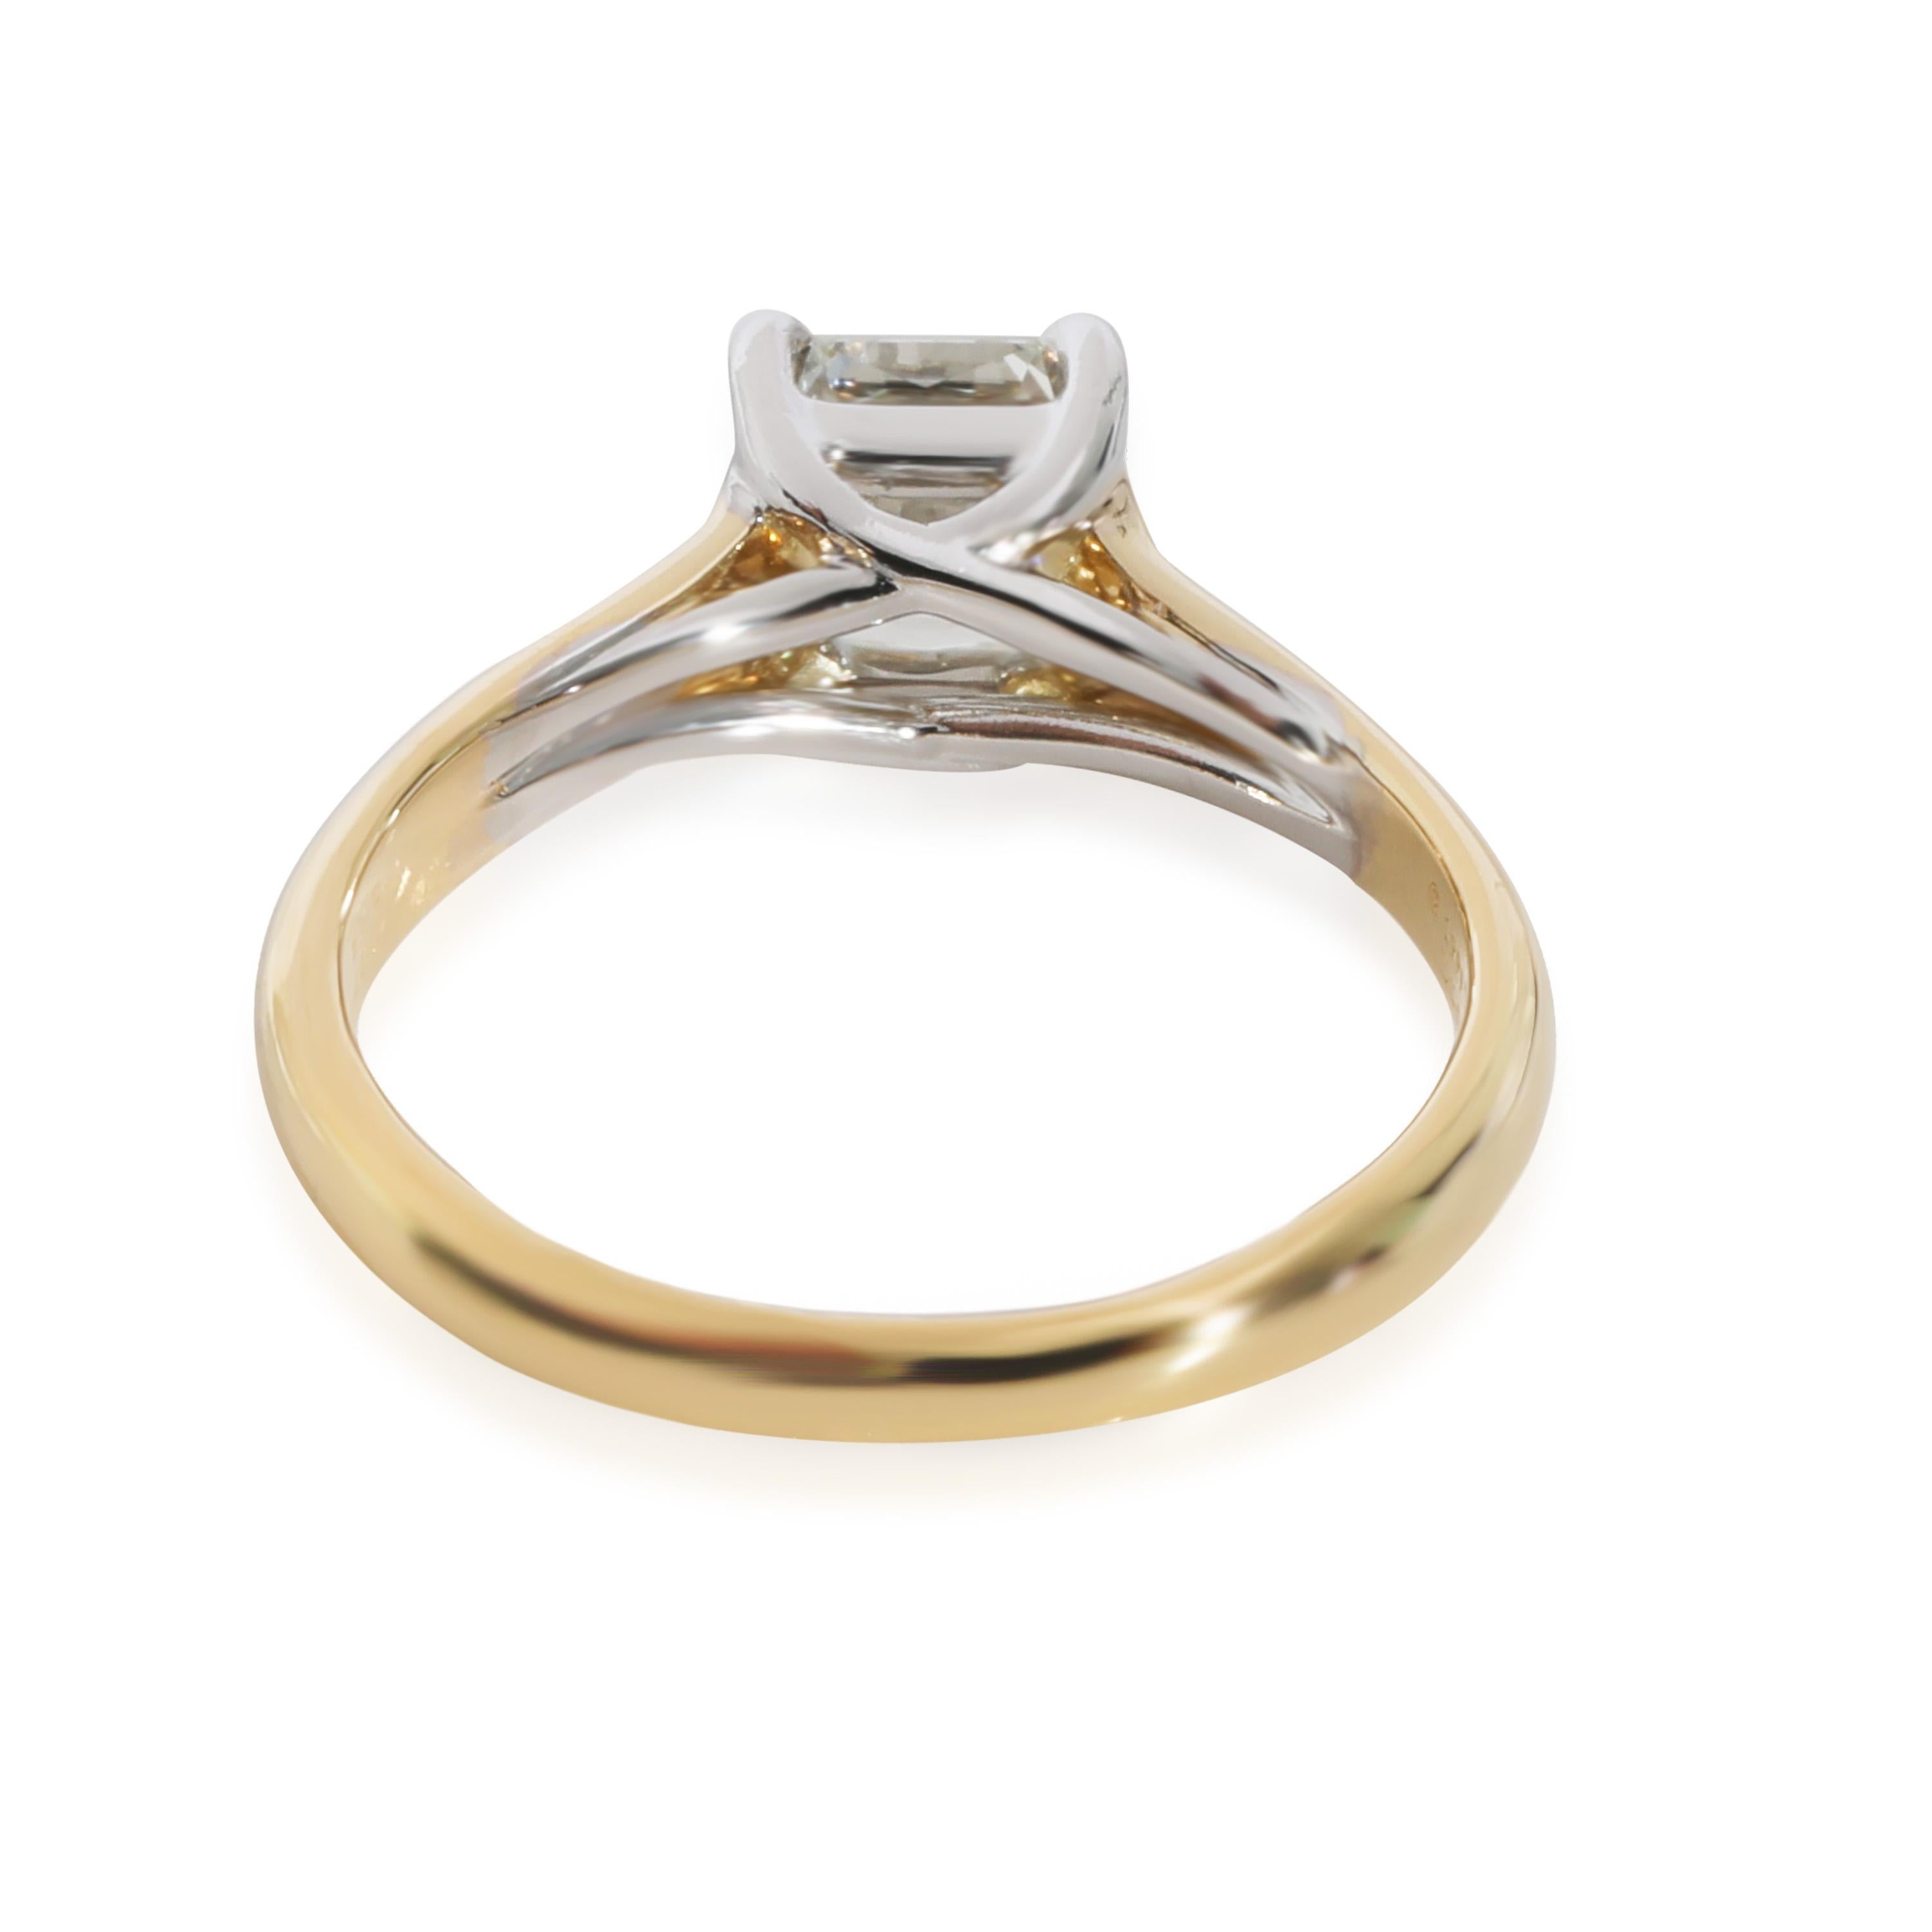 Tiffany & Co. Lucida Diamond Engagement Ring in 18KT Gold/Platinum I VS1 1.04CT

PRIMARY DETAILS
SKU: 128188
Listing Title: Tiffany & Co. Lucida Diamond Engagement Ring in 18KT Gold/Platinum I VS1 1.04CT
Condition Description: Retails for 13800 USD.